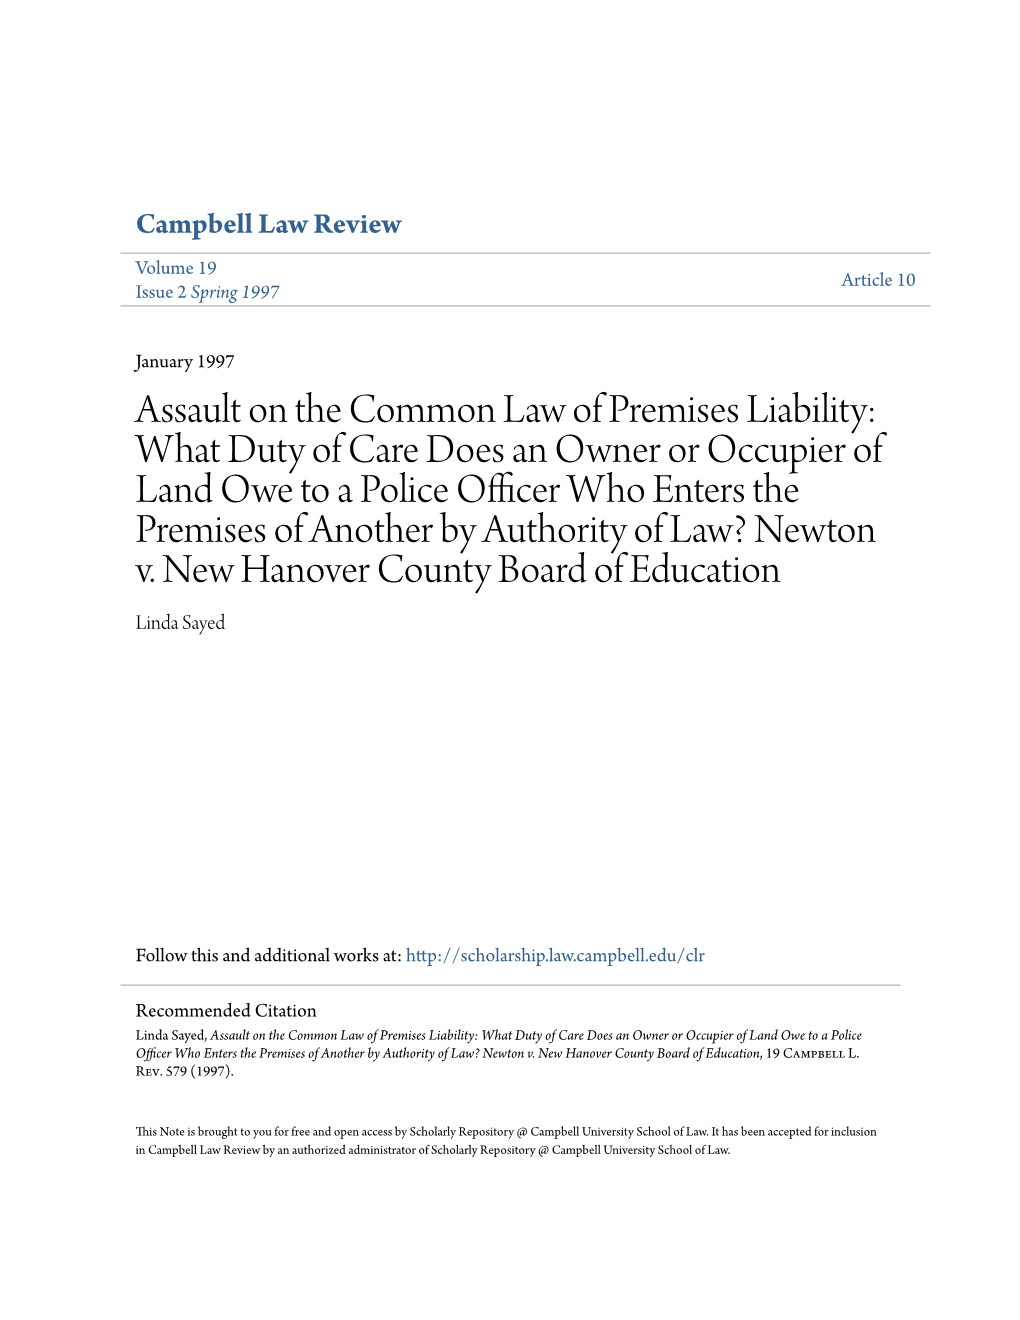 Assault on the Common Law of Premises Liability: What Duty Of